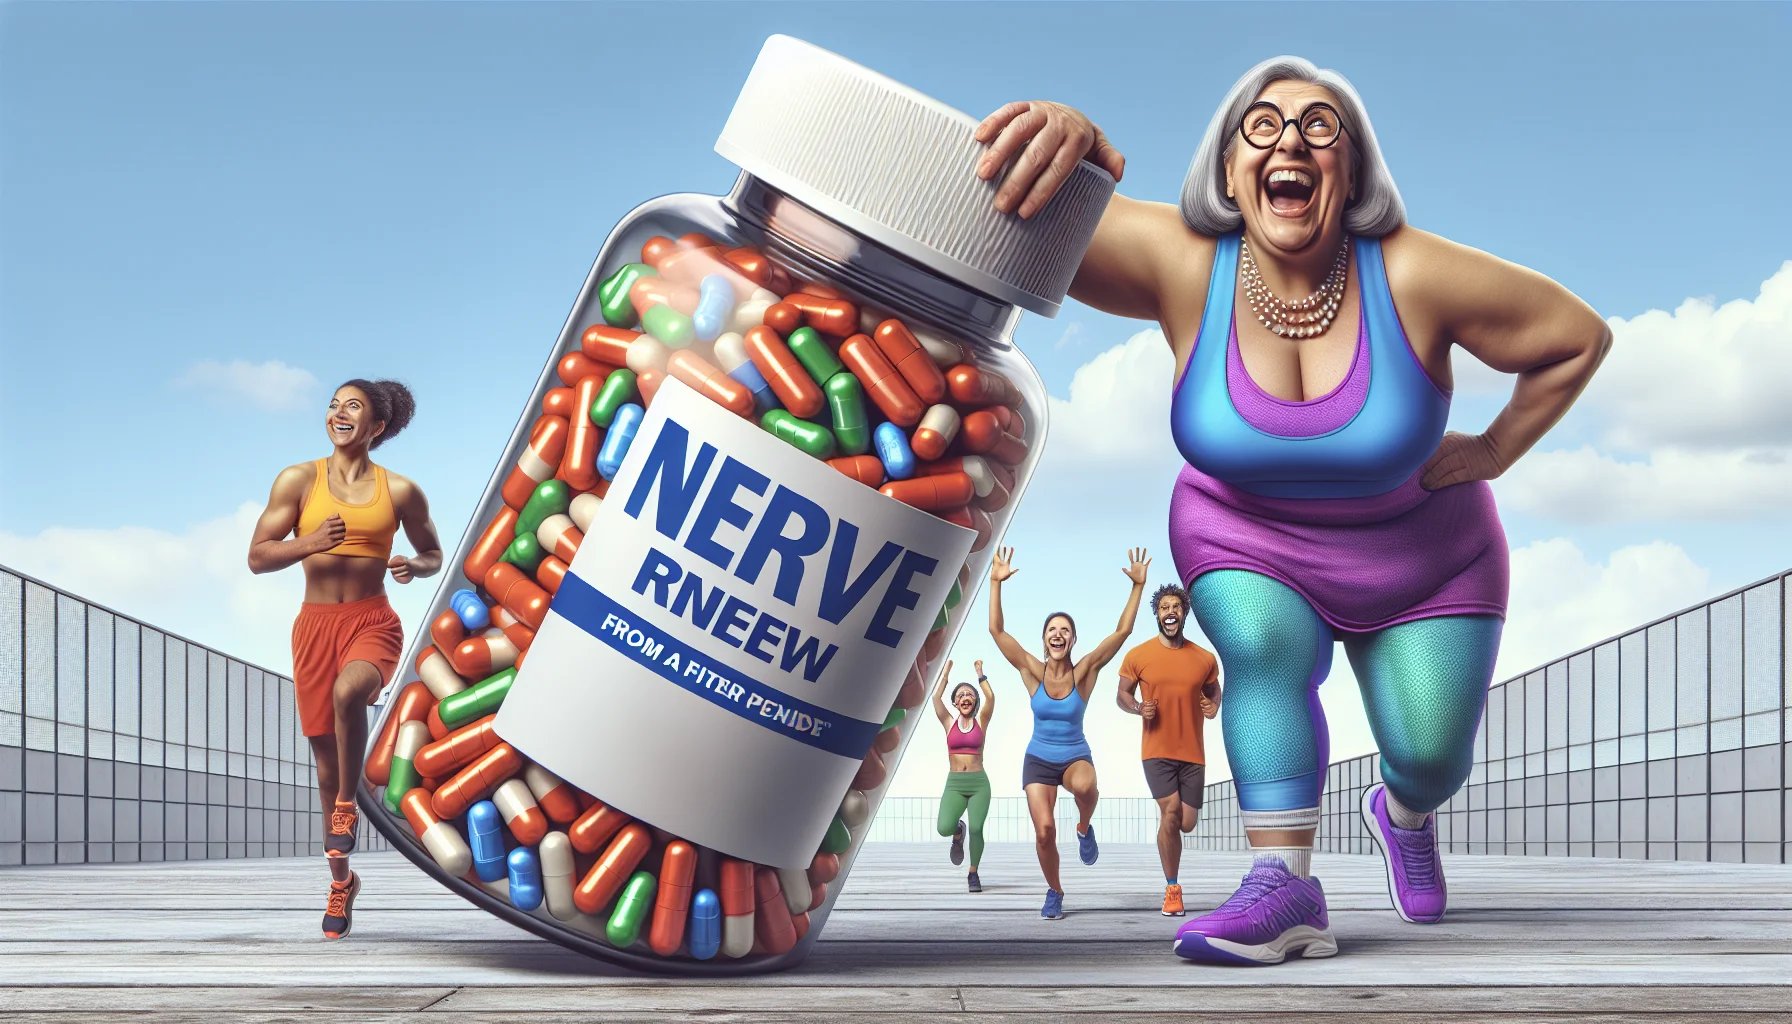 Create a humorous and engaging scenario that represents the topic 'Reviewing Nerve Renew from a Fitness Perspective'. The image should intrigue viewers to consider exercise and healthy lifestyles. Perhaps a fictional character, a fit middle-aged Hispanic woman, could be laughingly presenting a giant, exaggerated pill bottle labelled 'Nerve Renew' as if it was a fitness prize, while she's dressed in colourful athletic wear. A diverse group of people could be joyfully participating in different exercises in the background, like a South Asian man doing yoga, a Caucasian woman jogging, and a Black man lifting weights.